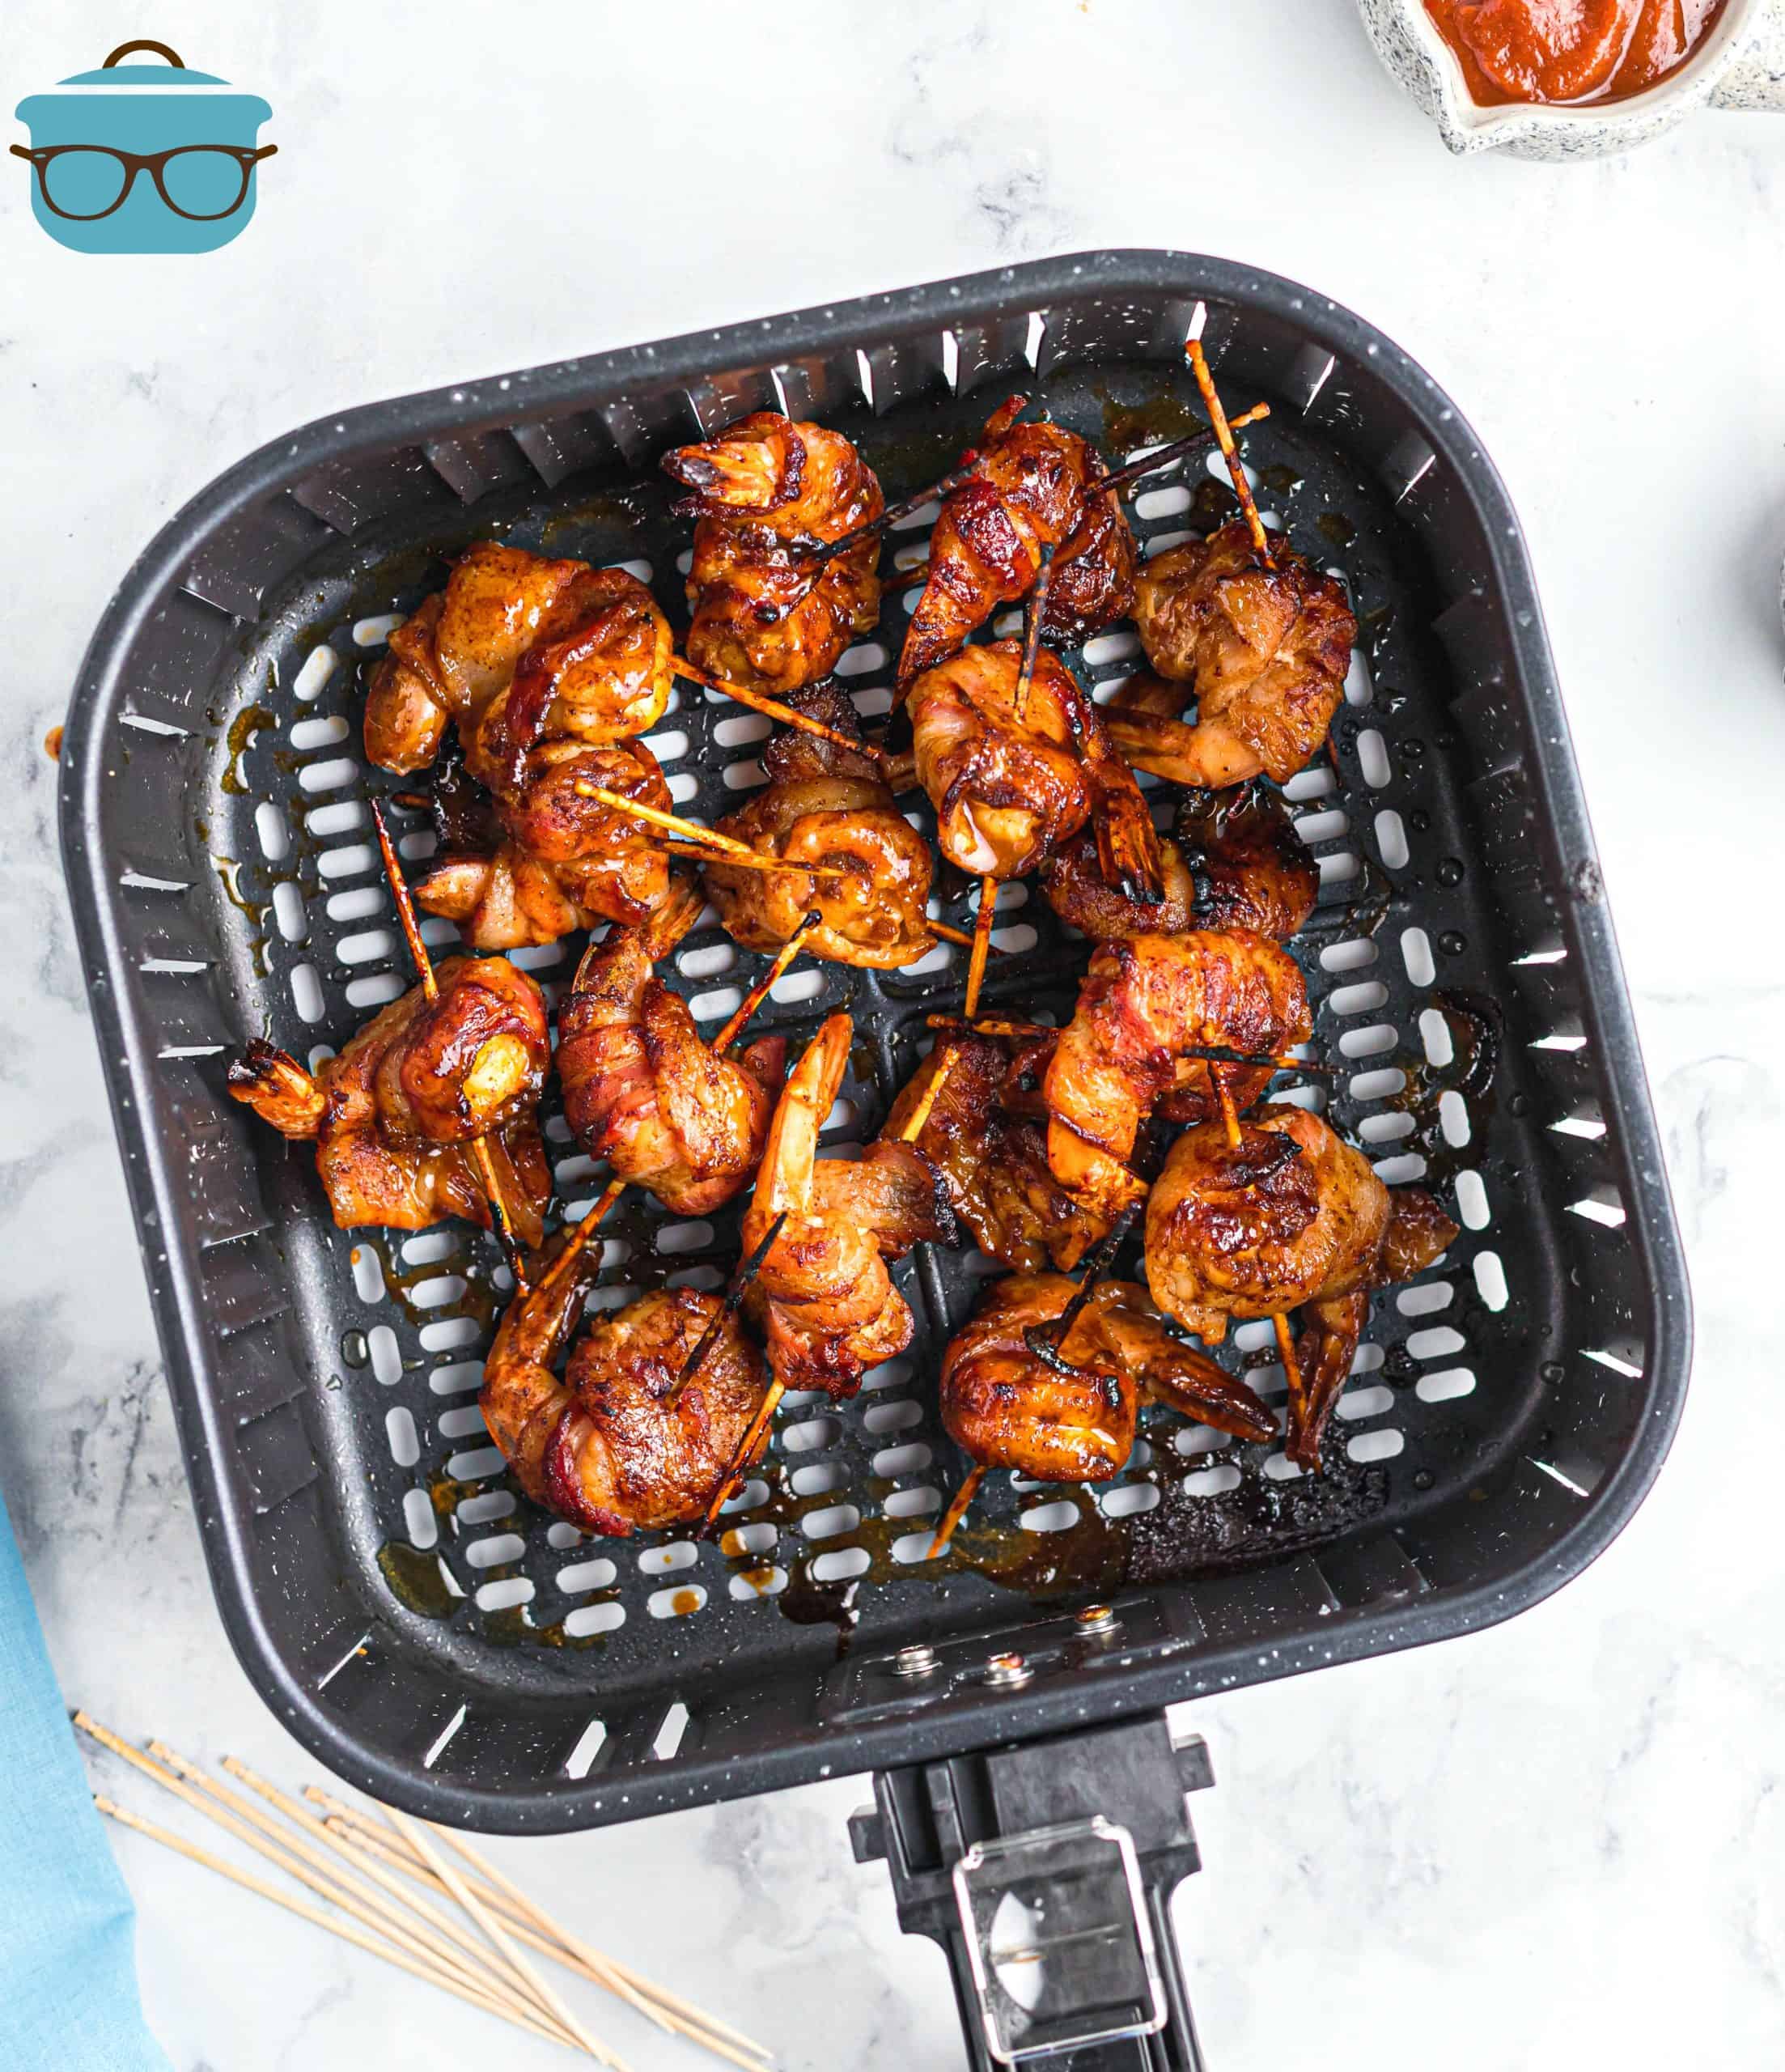 cooked bacon garlic shrimp shown in an air fryer basket.